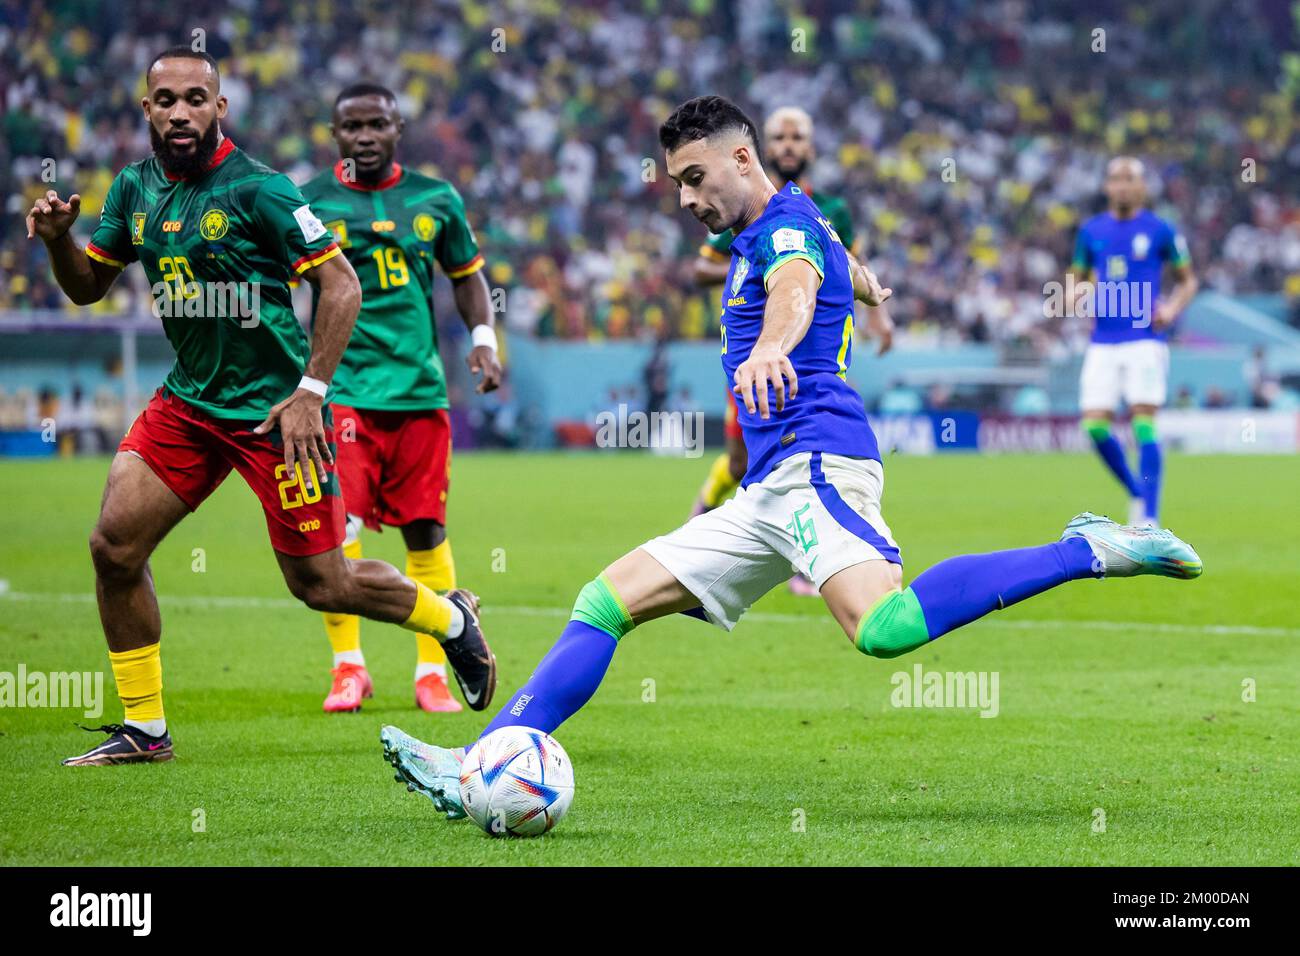 Lusail, Qatar. 02nd Dec, 2022. Soccer: World Cup, Cameroon - Brazil, preliminary round, Group G, Matchday 3, Lusail Stadium, Brazil's Gabriel Martinelli (r) in action against Cameroon's Bryan Mbeumo (l). Credit: Tom Weller/dpa/Alamy Live News Stock Photo